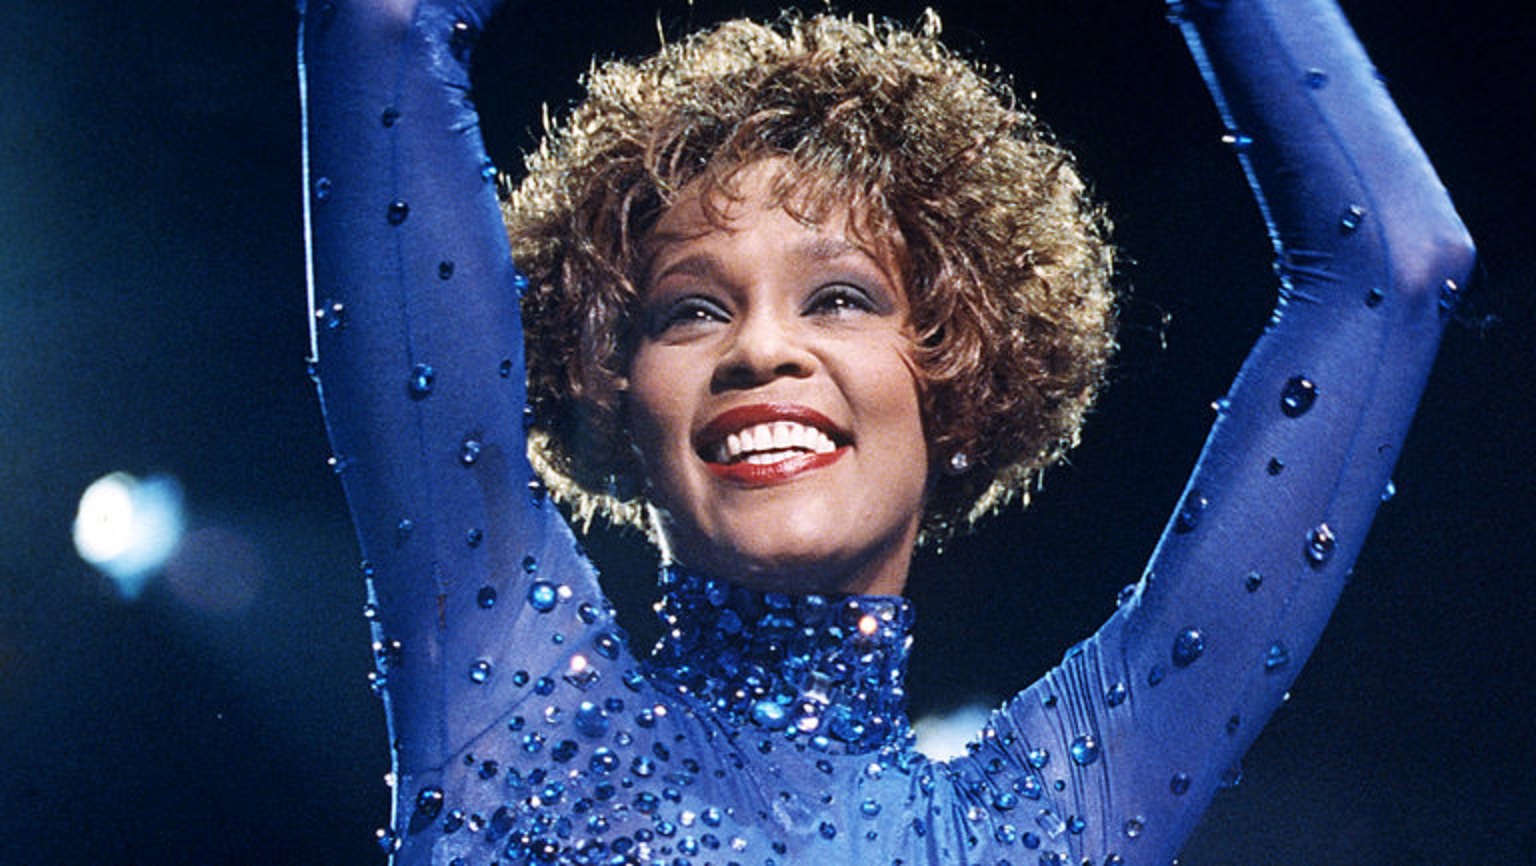 Whitney Houston Re-enters Billboard Hot 100 Charts After 10 Years, With ‘Higher Love’ Remake!